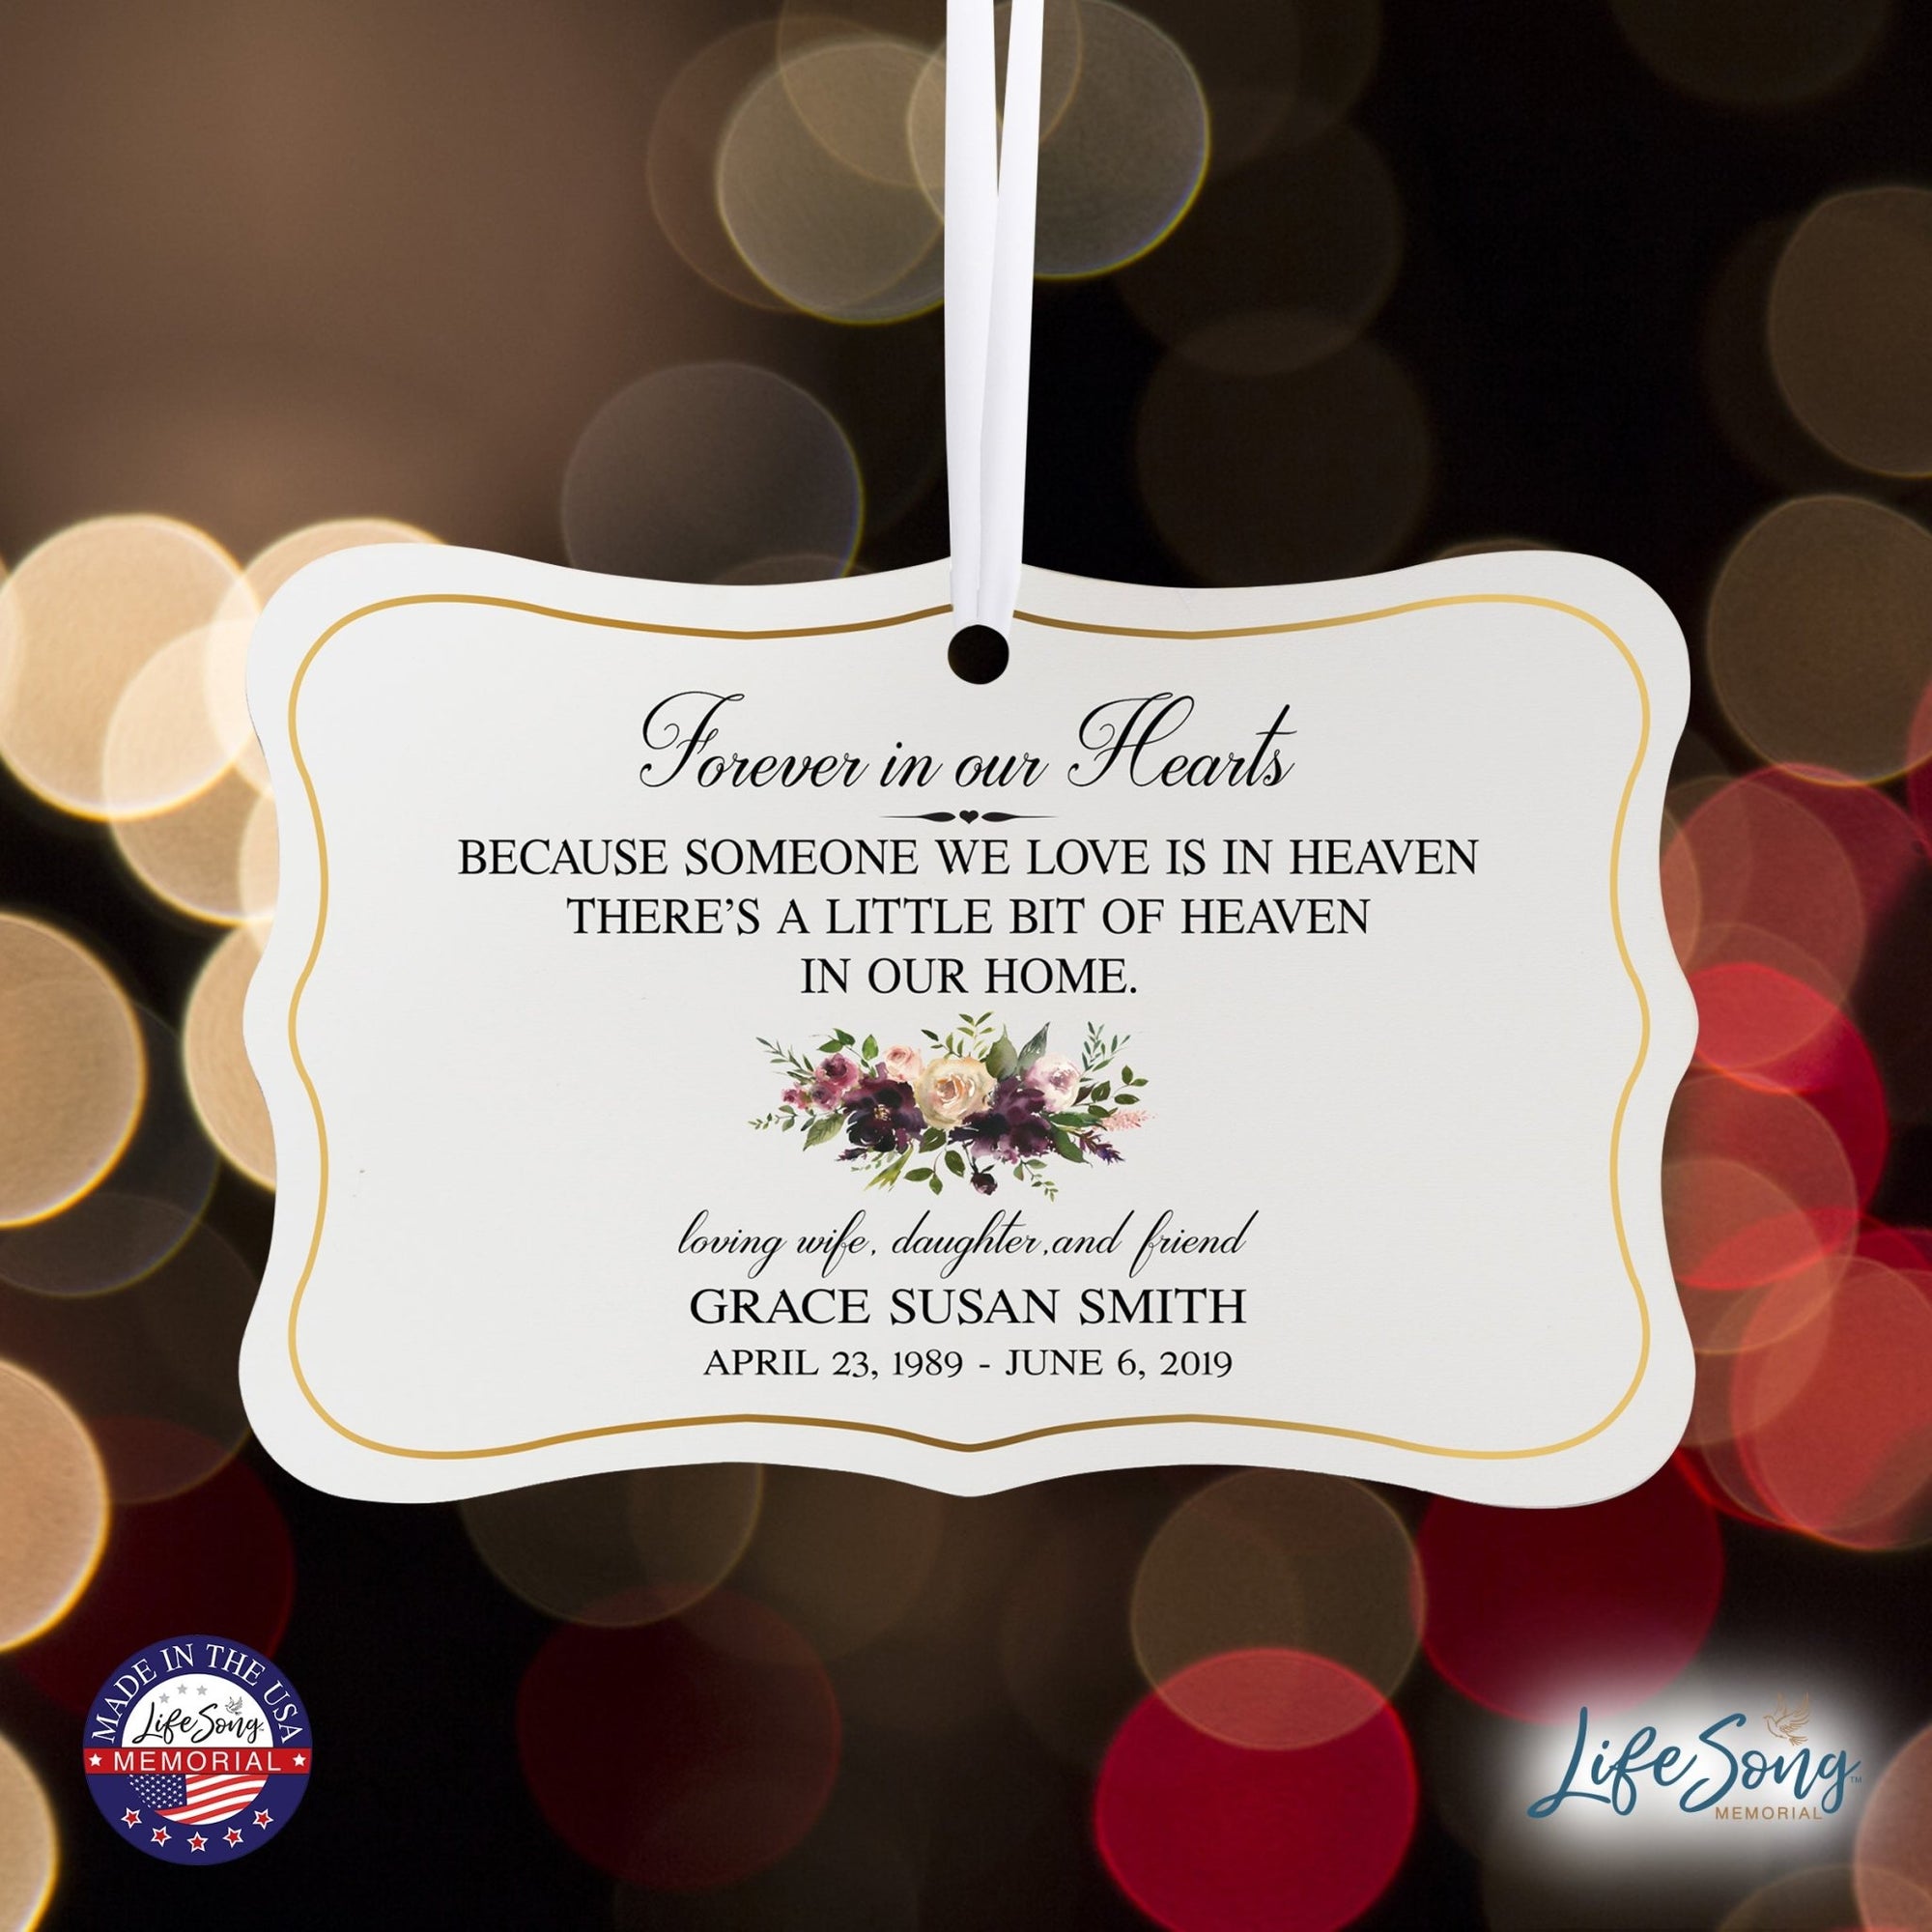 Personalized Memorial White Scalloped Memorial Ornament For The Loss Of Loved One 4x2.5 - Forever In Our Hearts - LifeSong Milestones